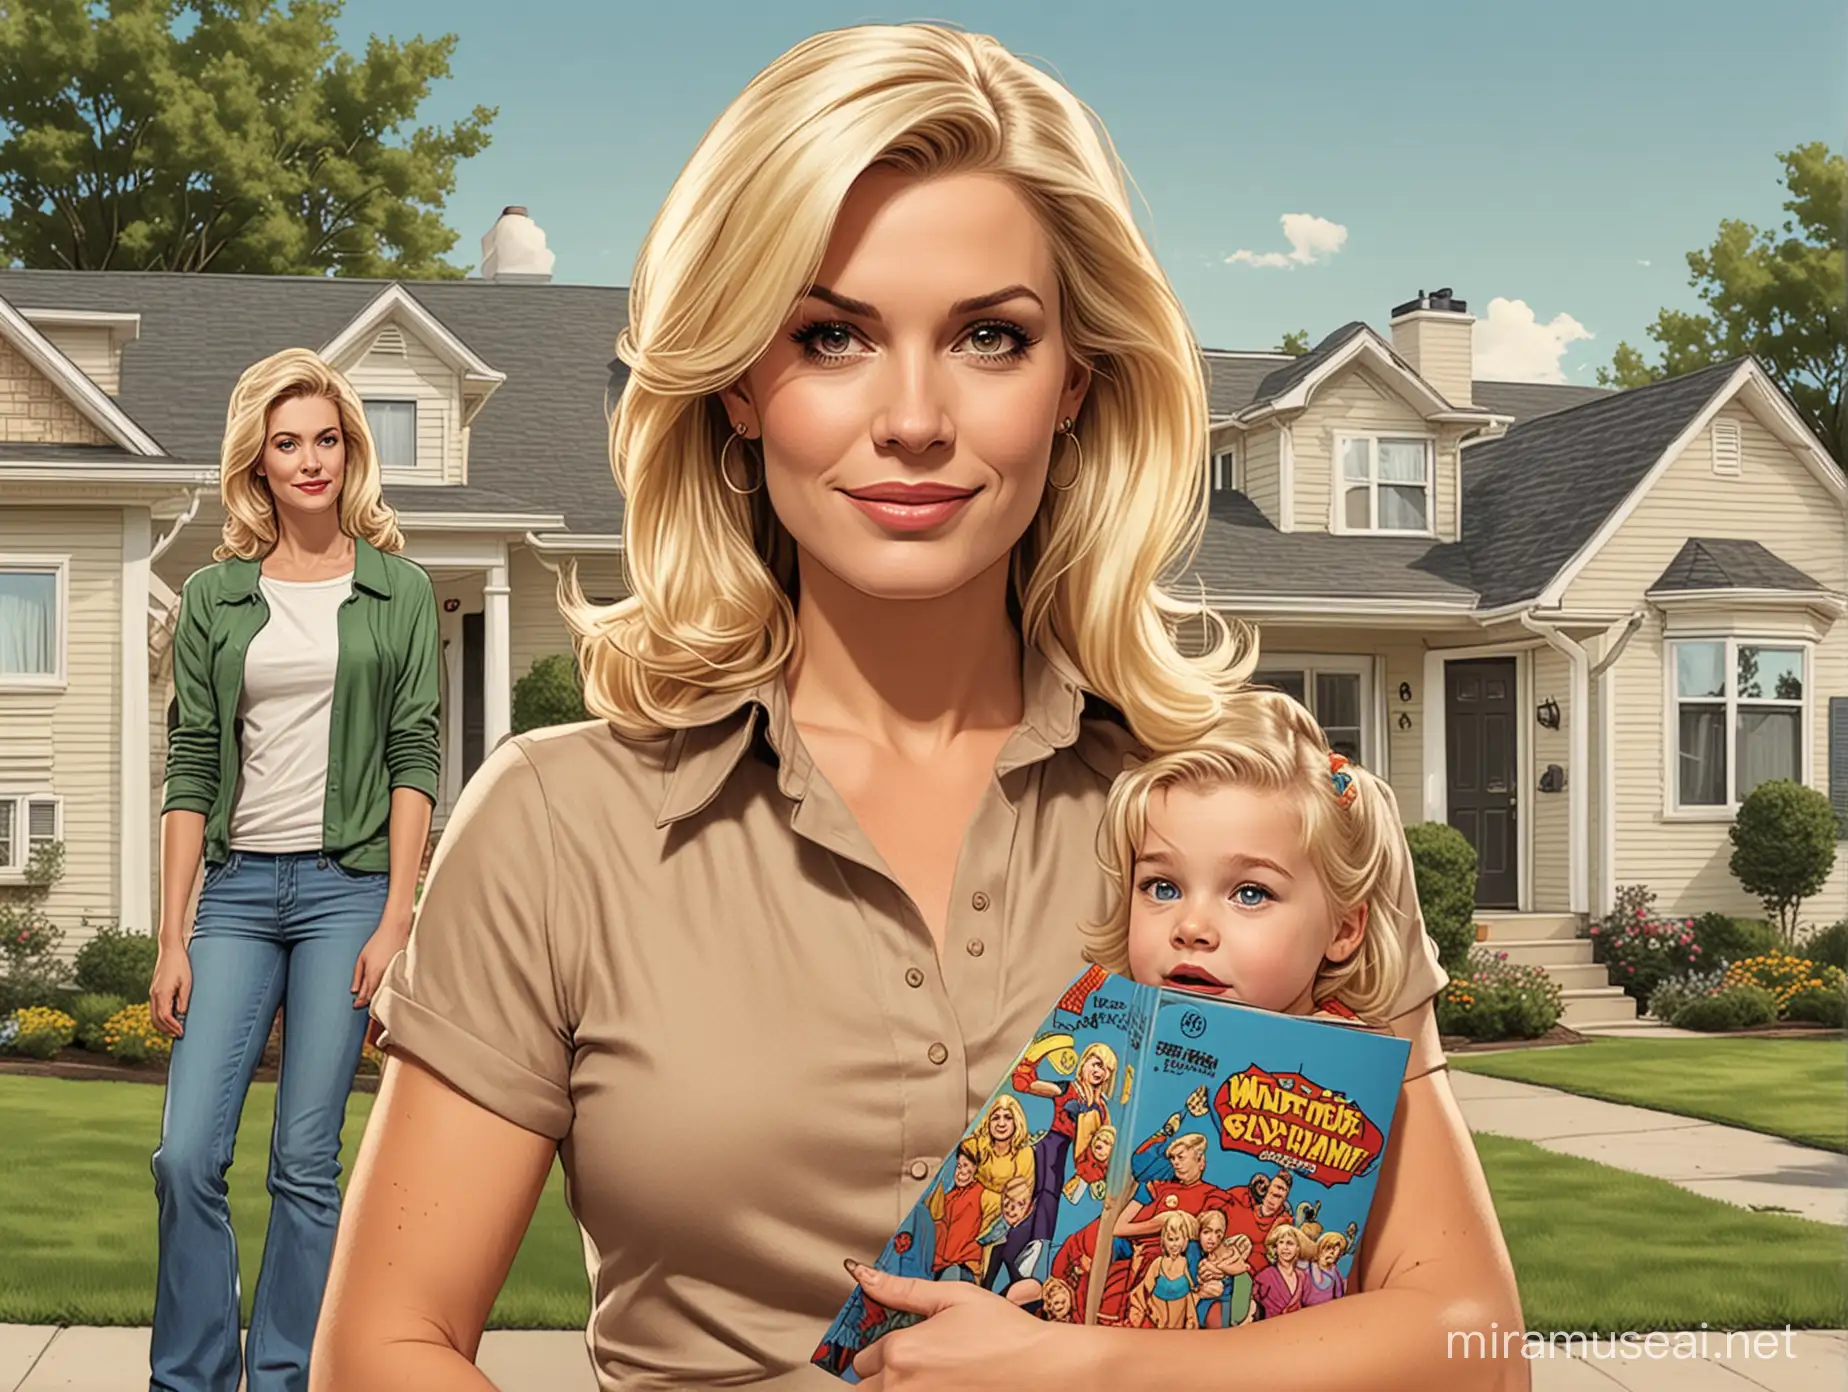 Blonde Woman Leading Everyday Suburban Life with Family in Comic Book Cartoon Style